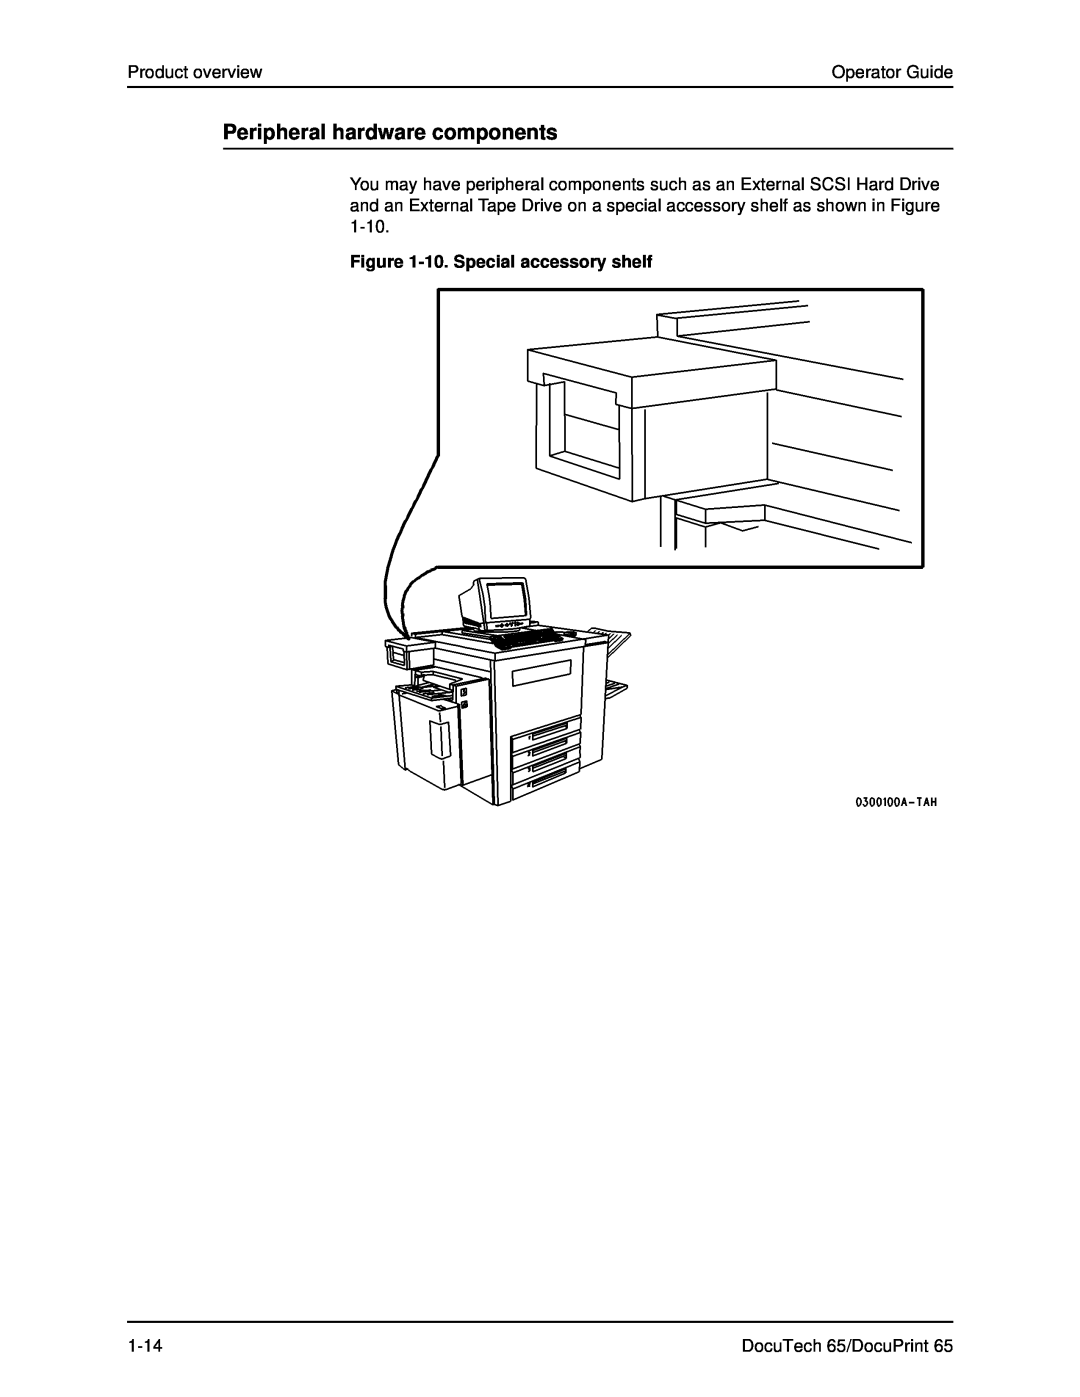 Xerox DOCUTECH 65 manual Peripheral hardware components, 10. Special accessory shelf 